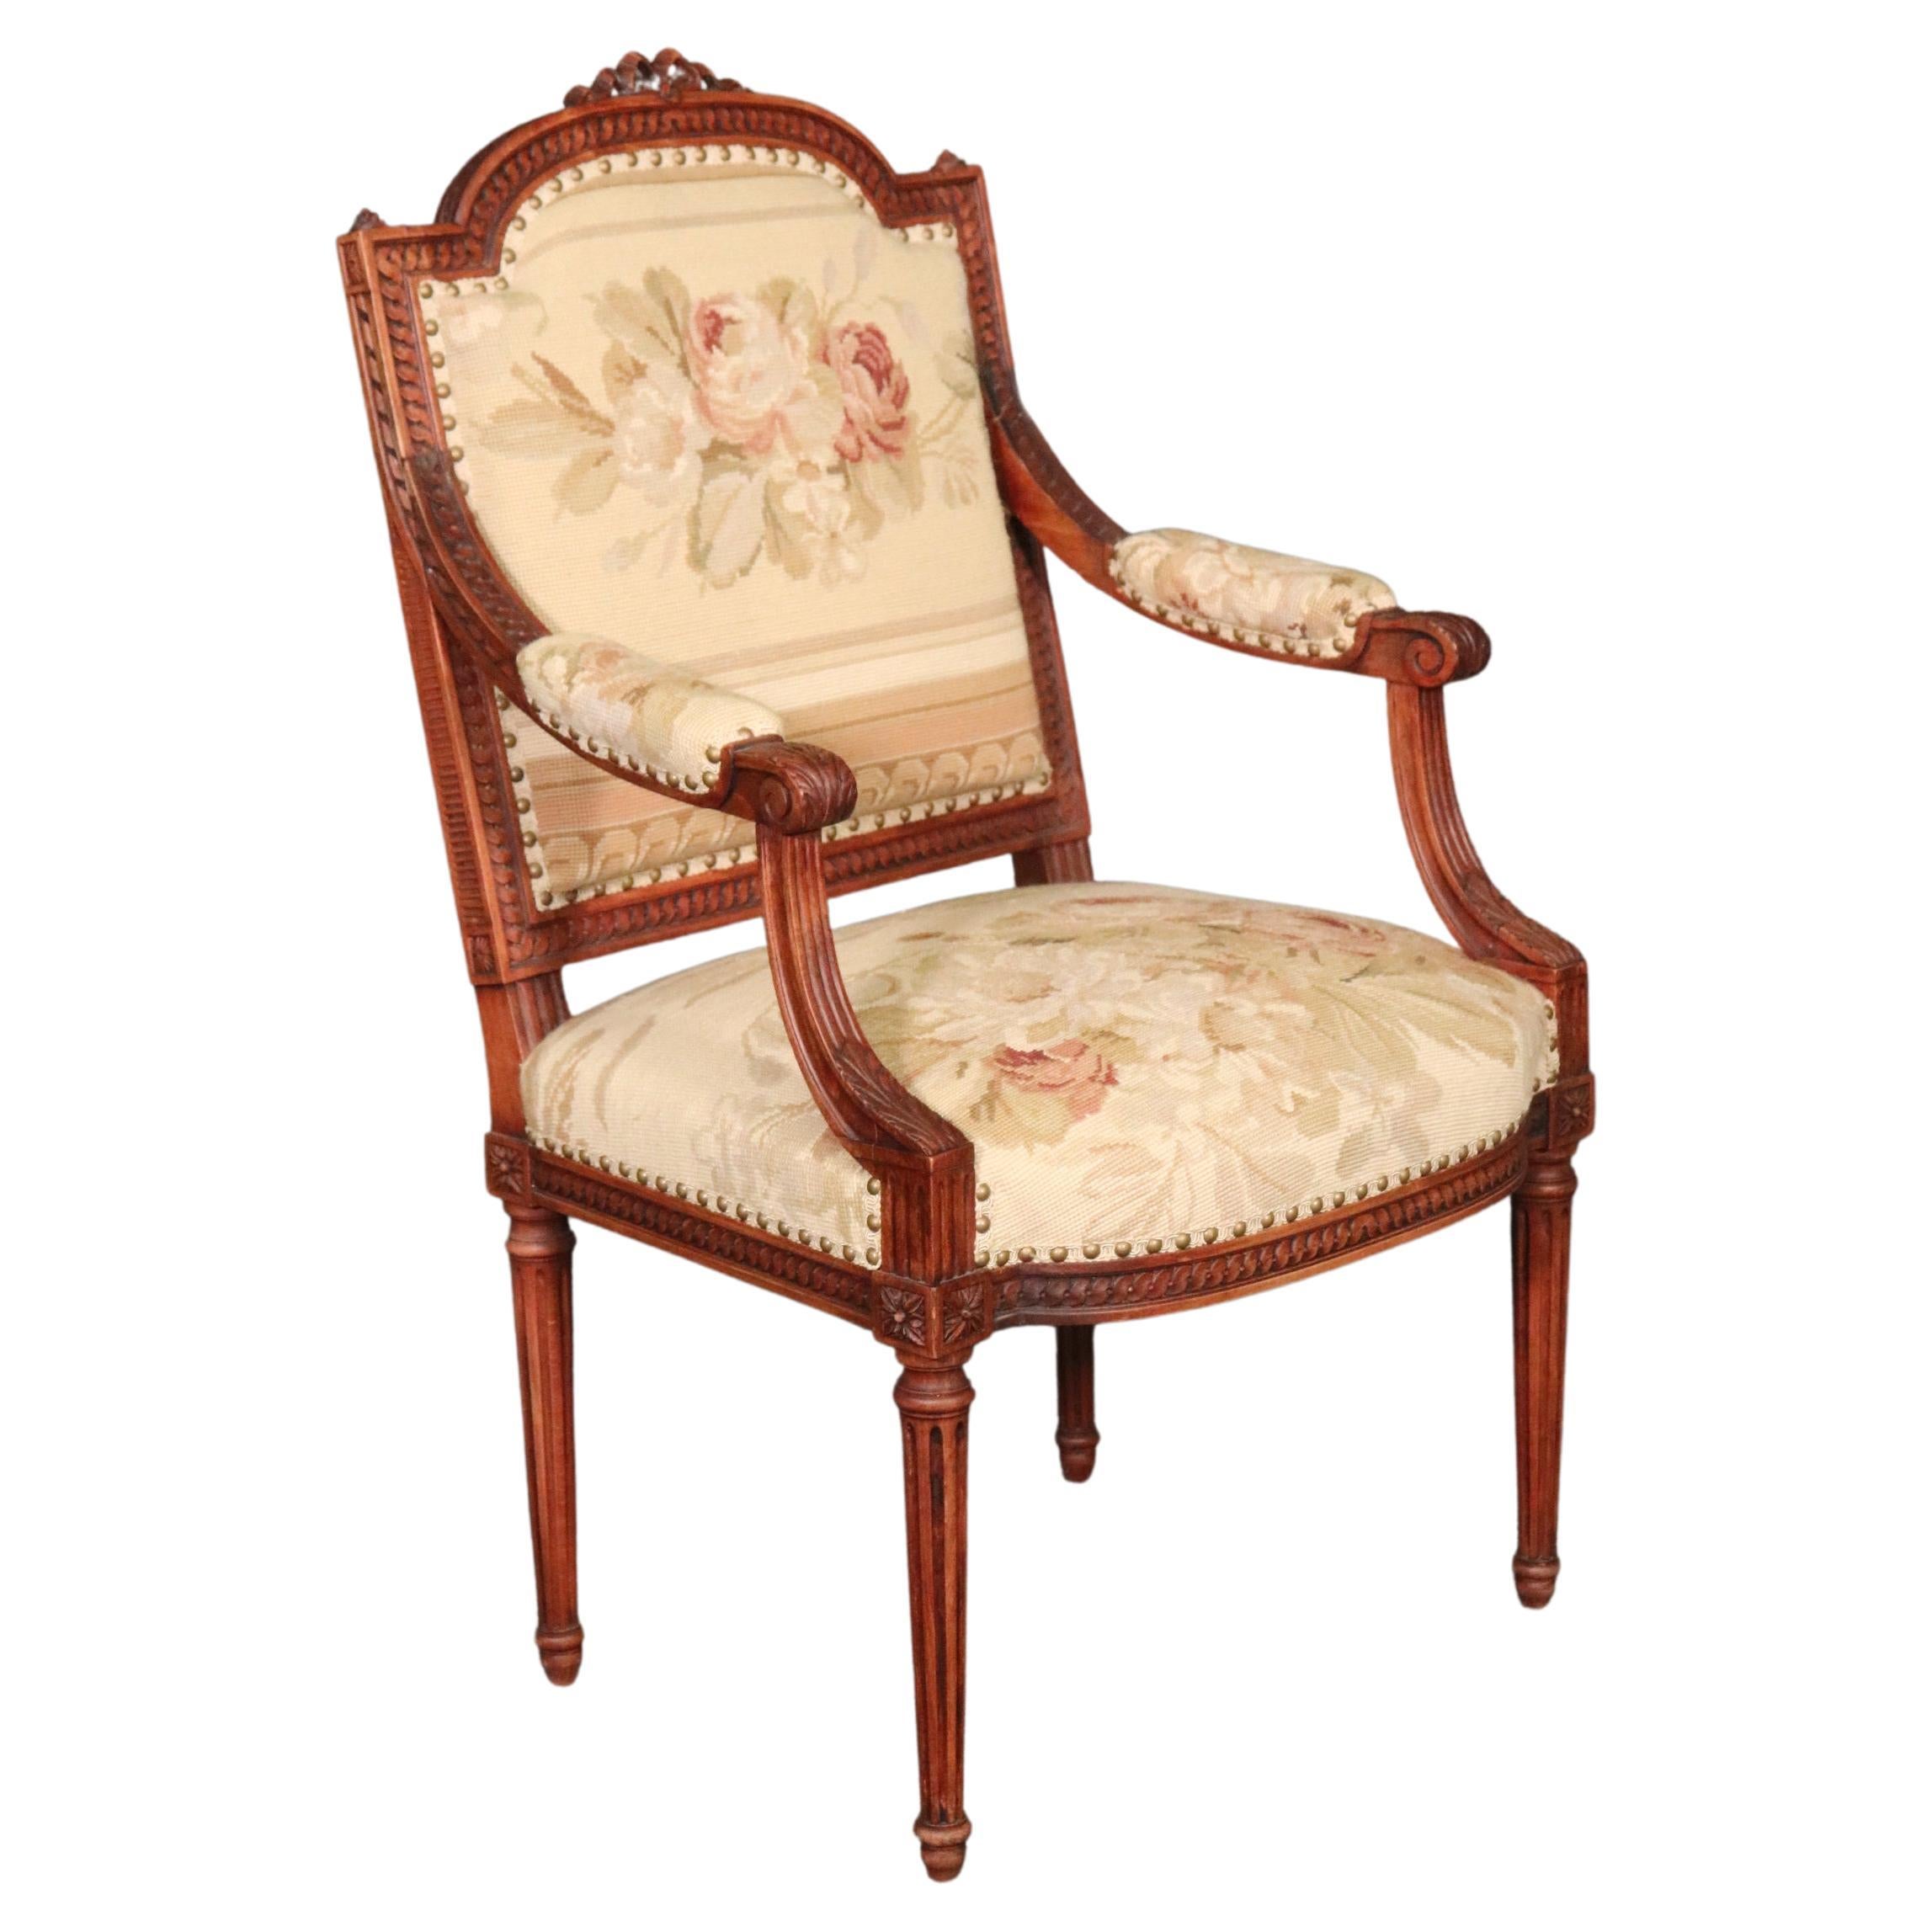 French Louis XVI Needlepoint Fauteuil Armchair in Walnut, circa 1890